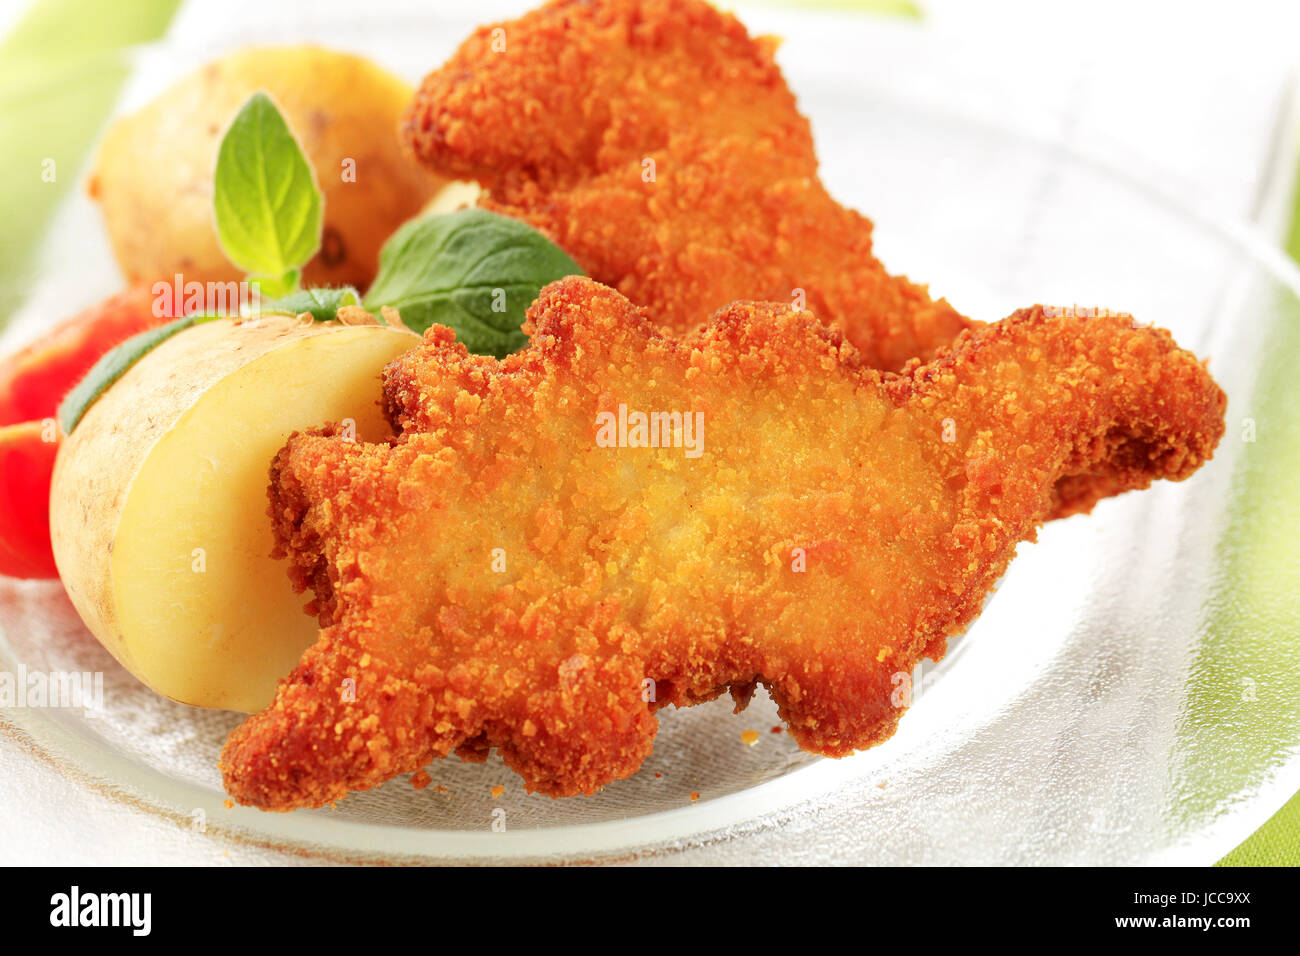 Fried dinosaur-shaped fish nuggets with new potatoes Stock Photo